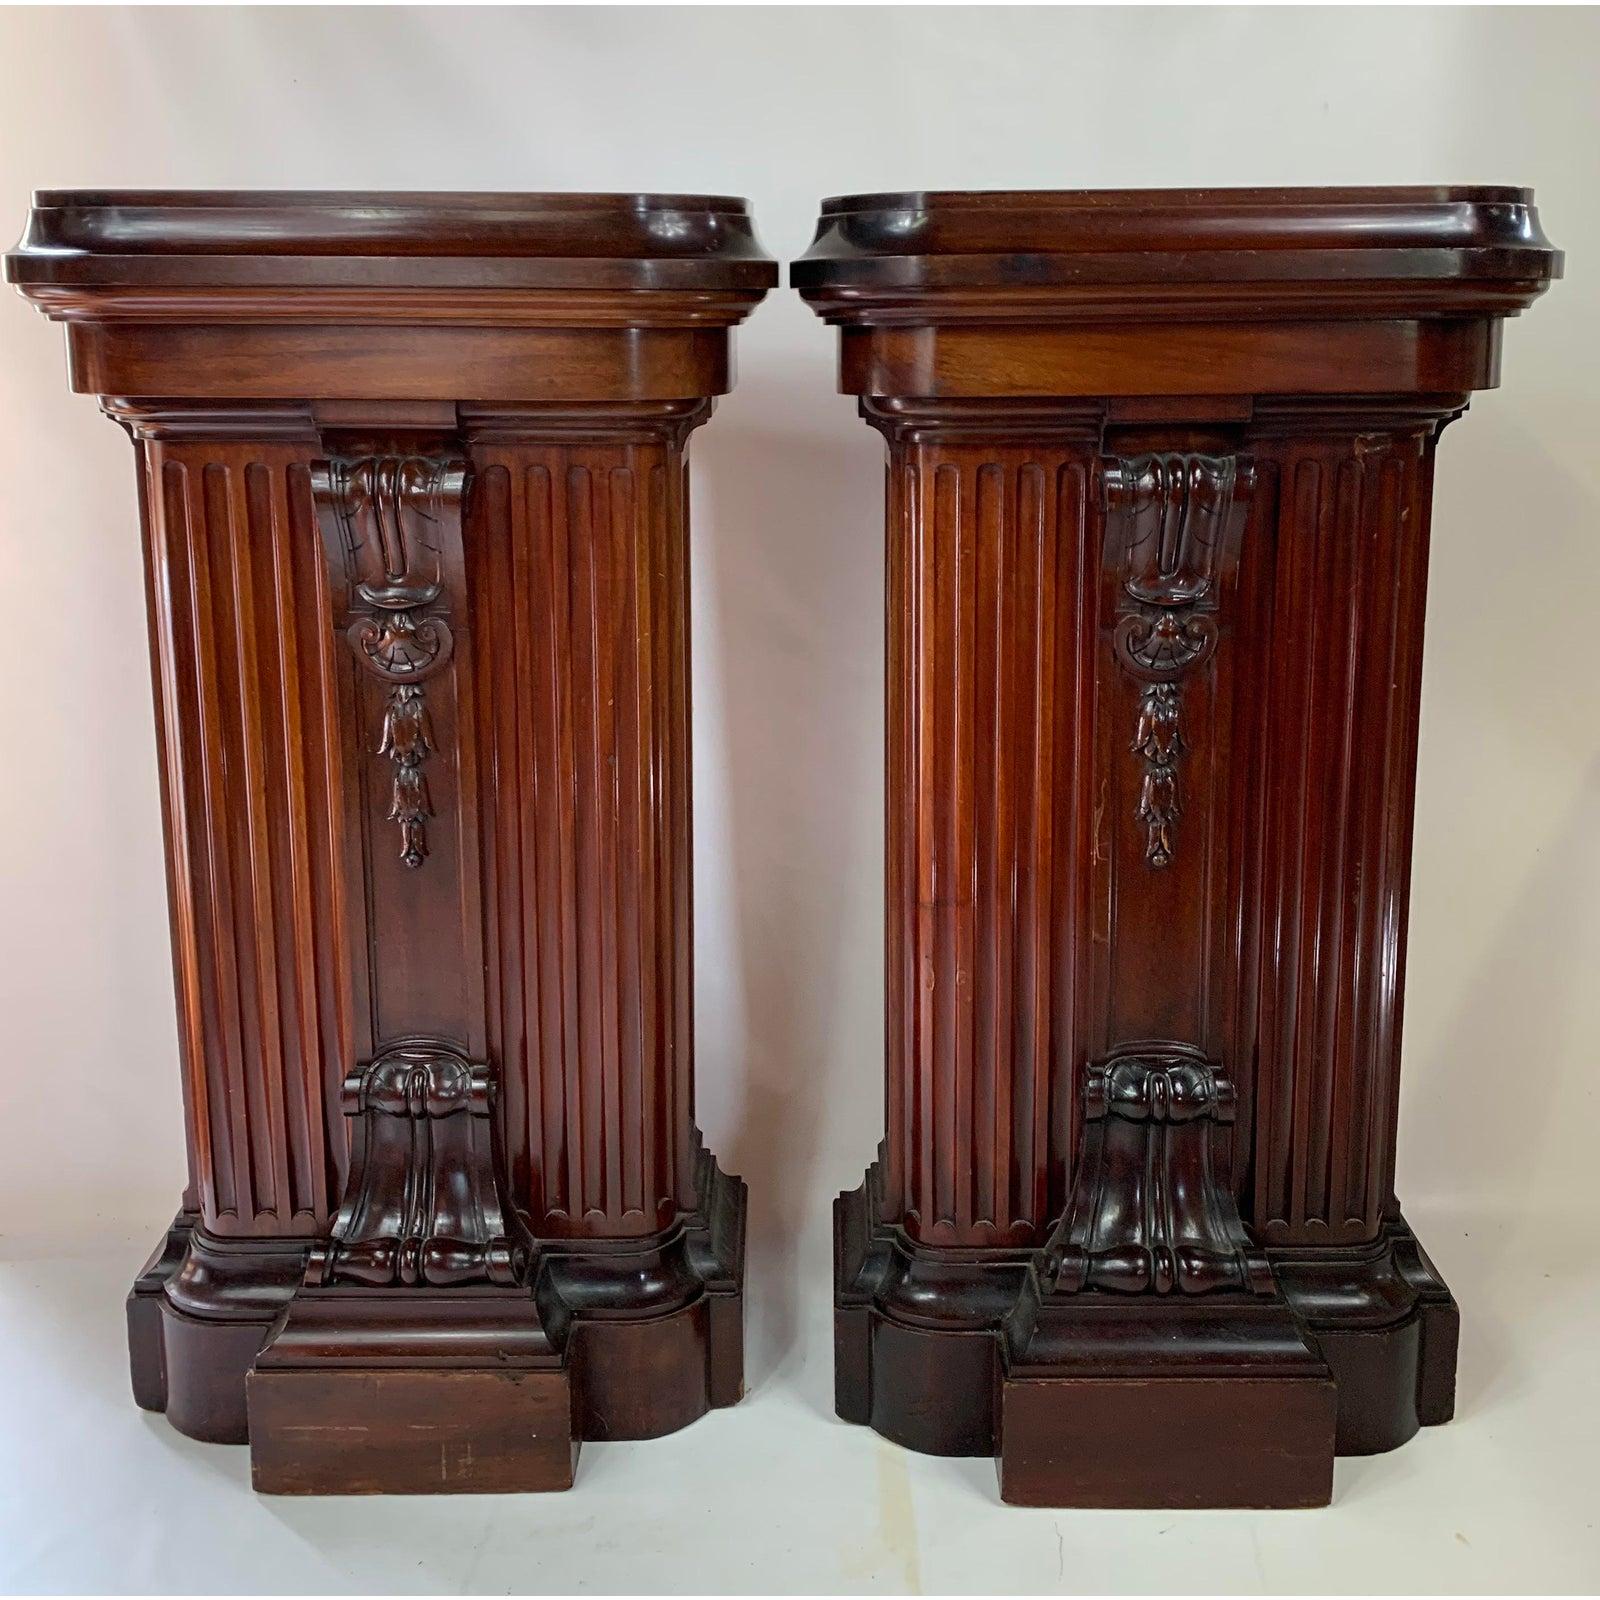 1870s heavy Victorian carved mahogany pedestal. Absolutely gorgeous heavy mahogany carved pedestals. Two available for sale, great for a bust, piece of art or lighting. These have very nice detail and are made very well.